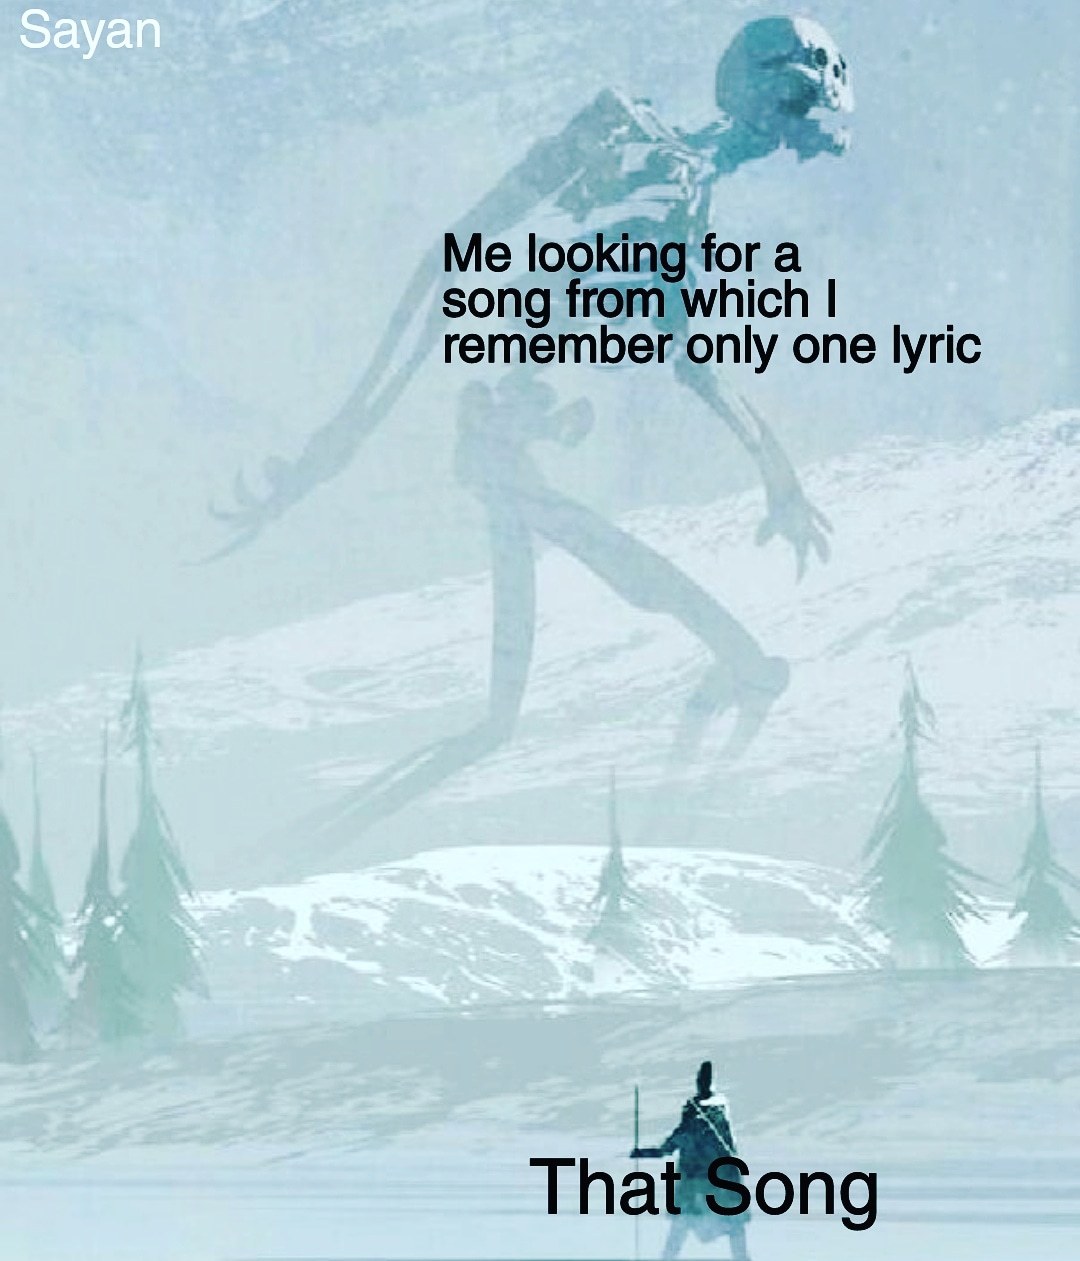 Dank Memes The Struggle Of Finding The Song Via R Memes